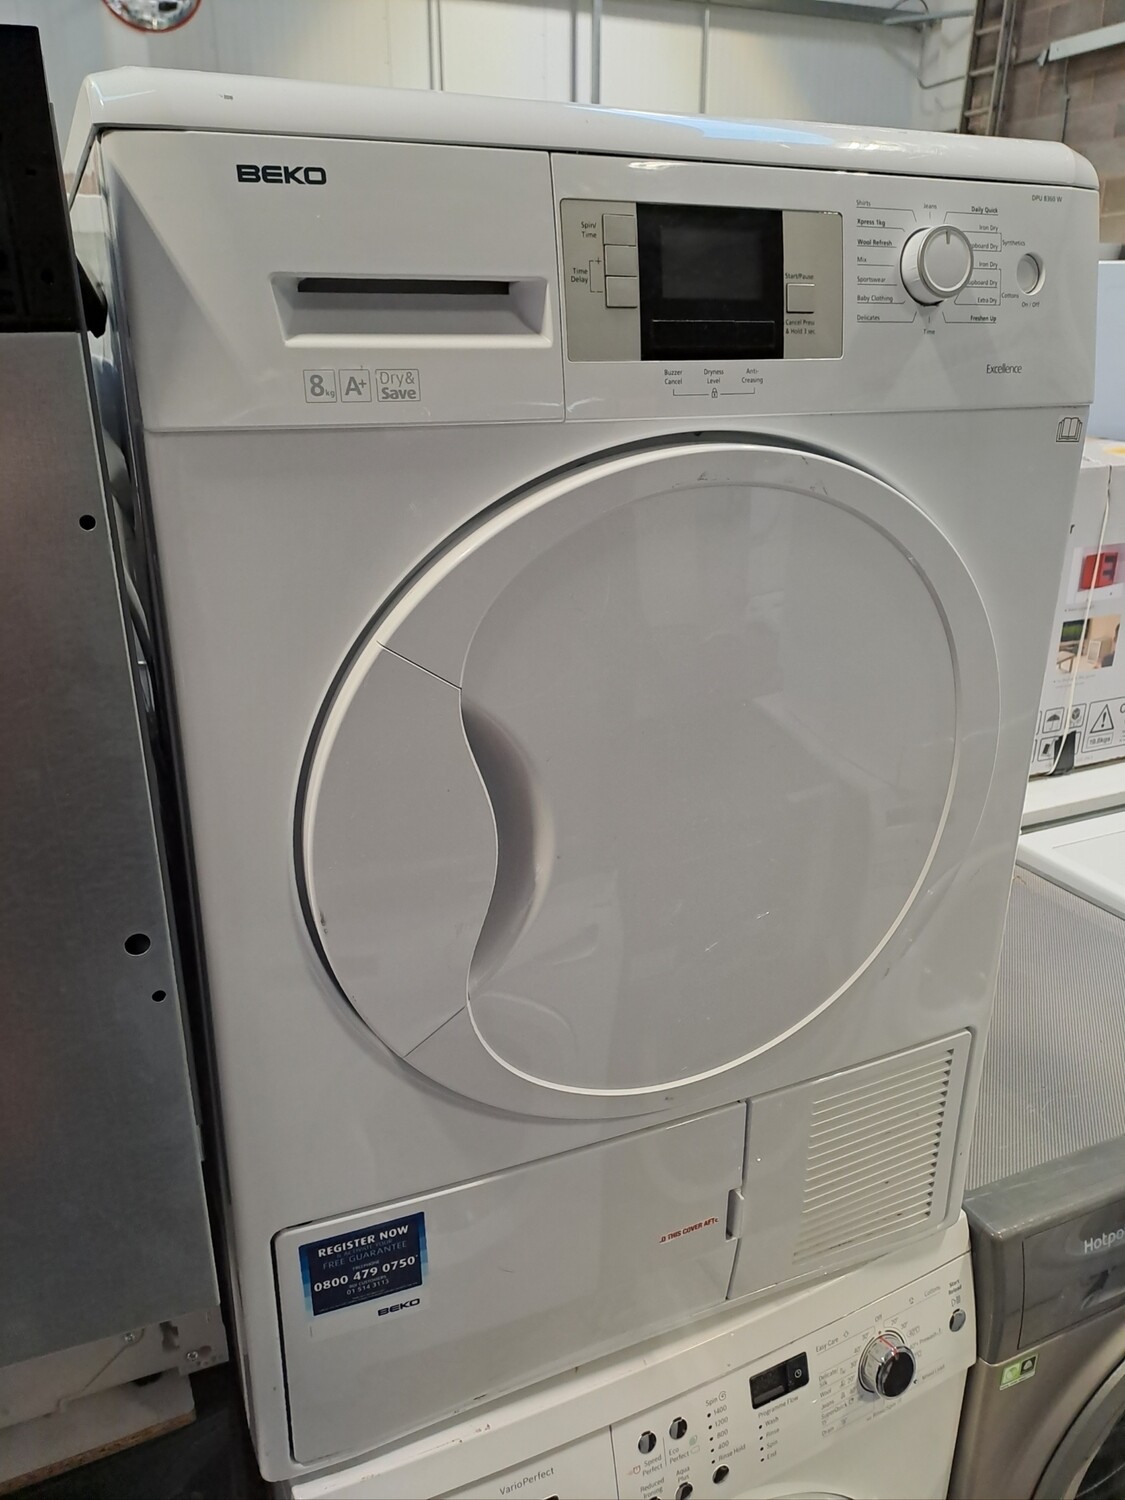 Beko DPU8360 8kg A+ Condenser HEAT PUMP Energy Saving Dryer White Refurbished 6 Months Guarantee. This item is Located in our Whitby Road Shop